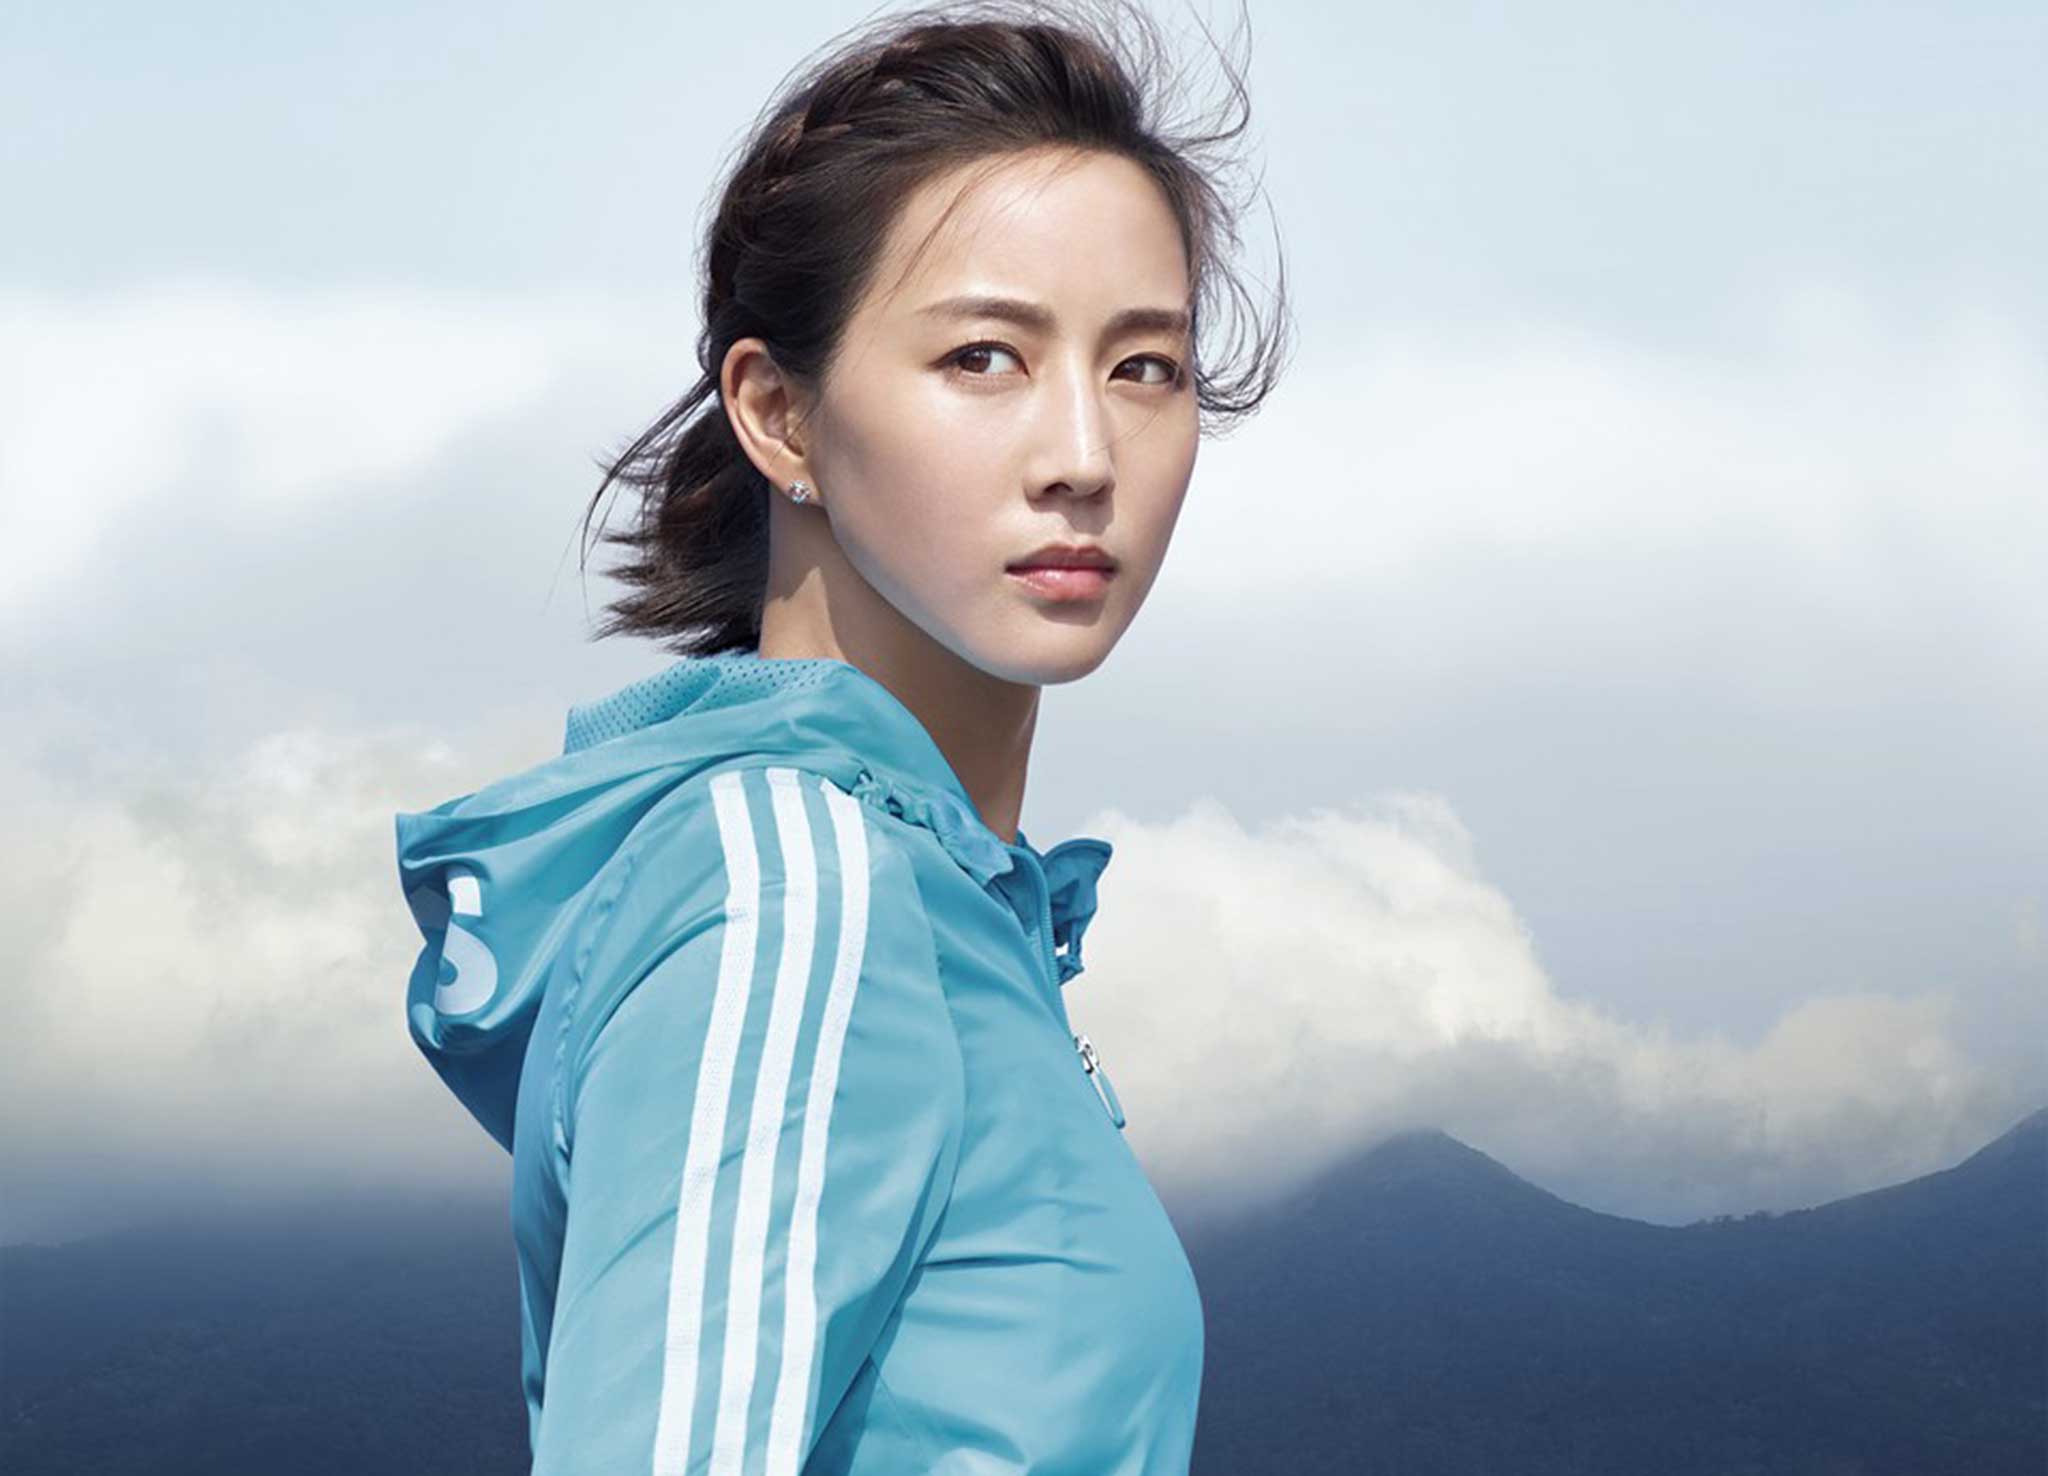 adidas_SS16_Outer-Jacket_Janine-1-copy2